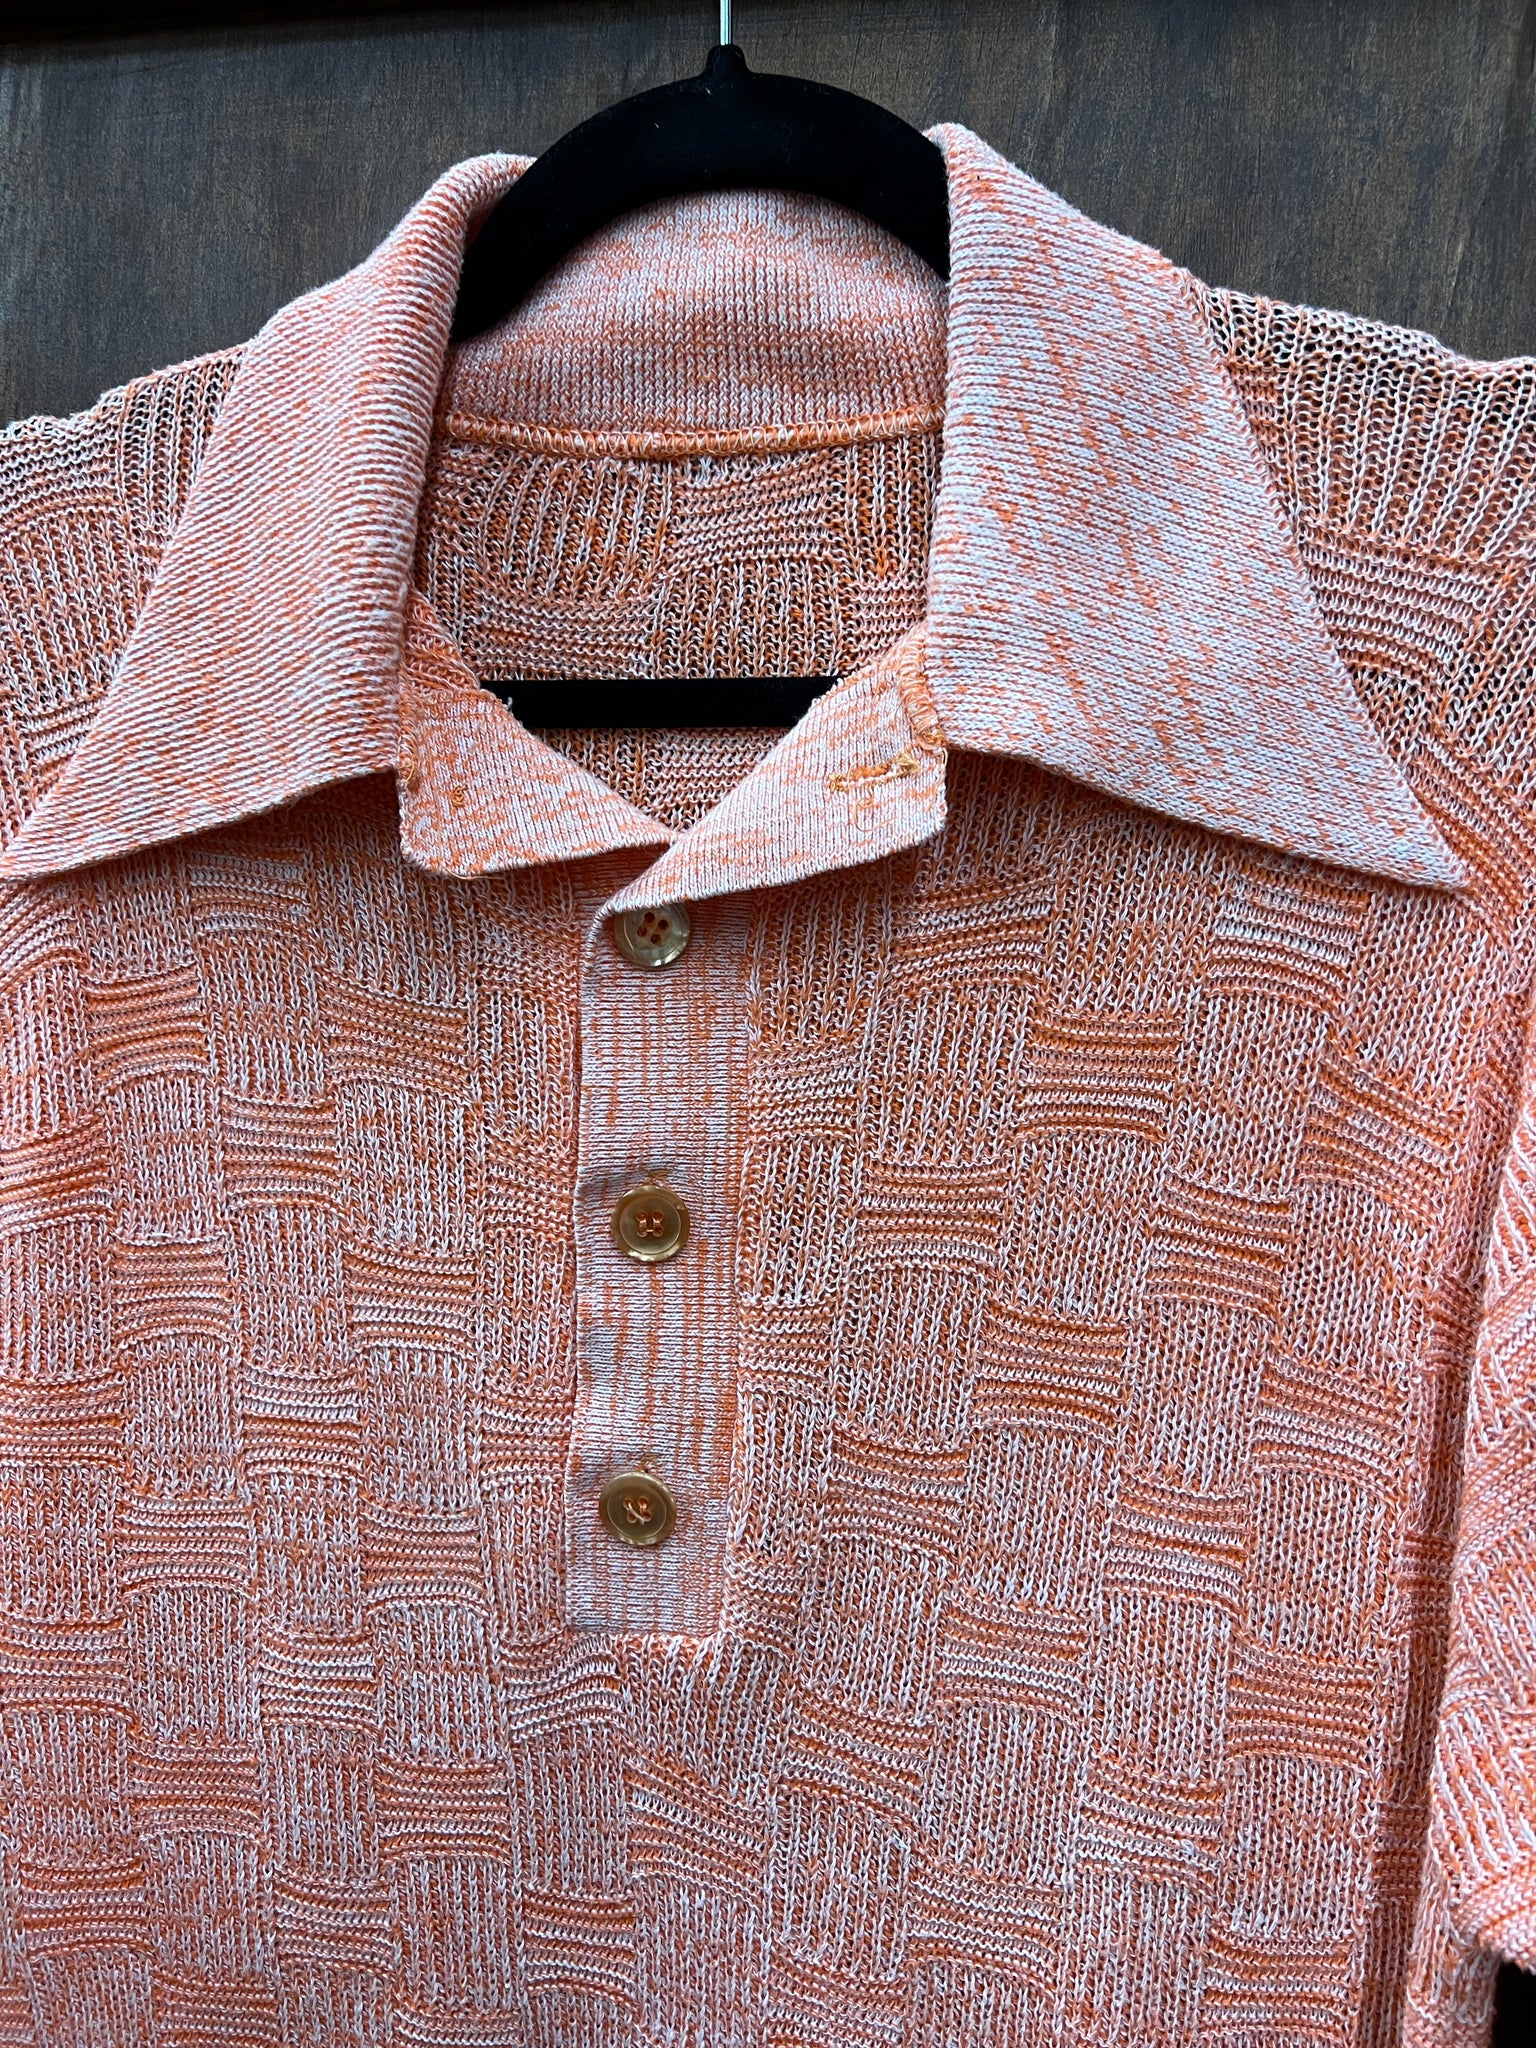 1970s MENS SWEATER- coral heather collared knit s/s